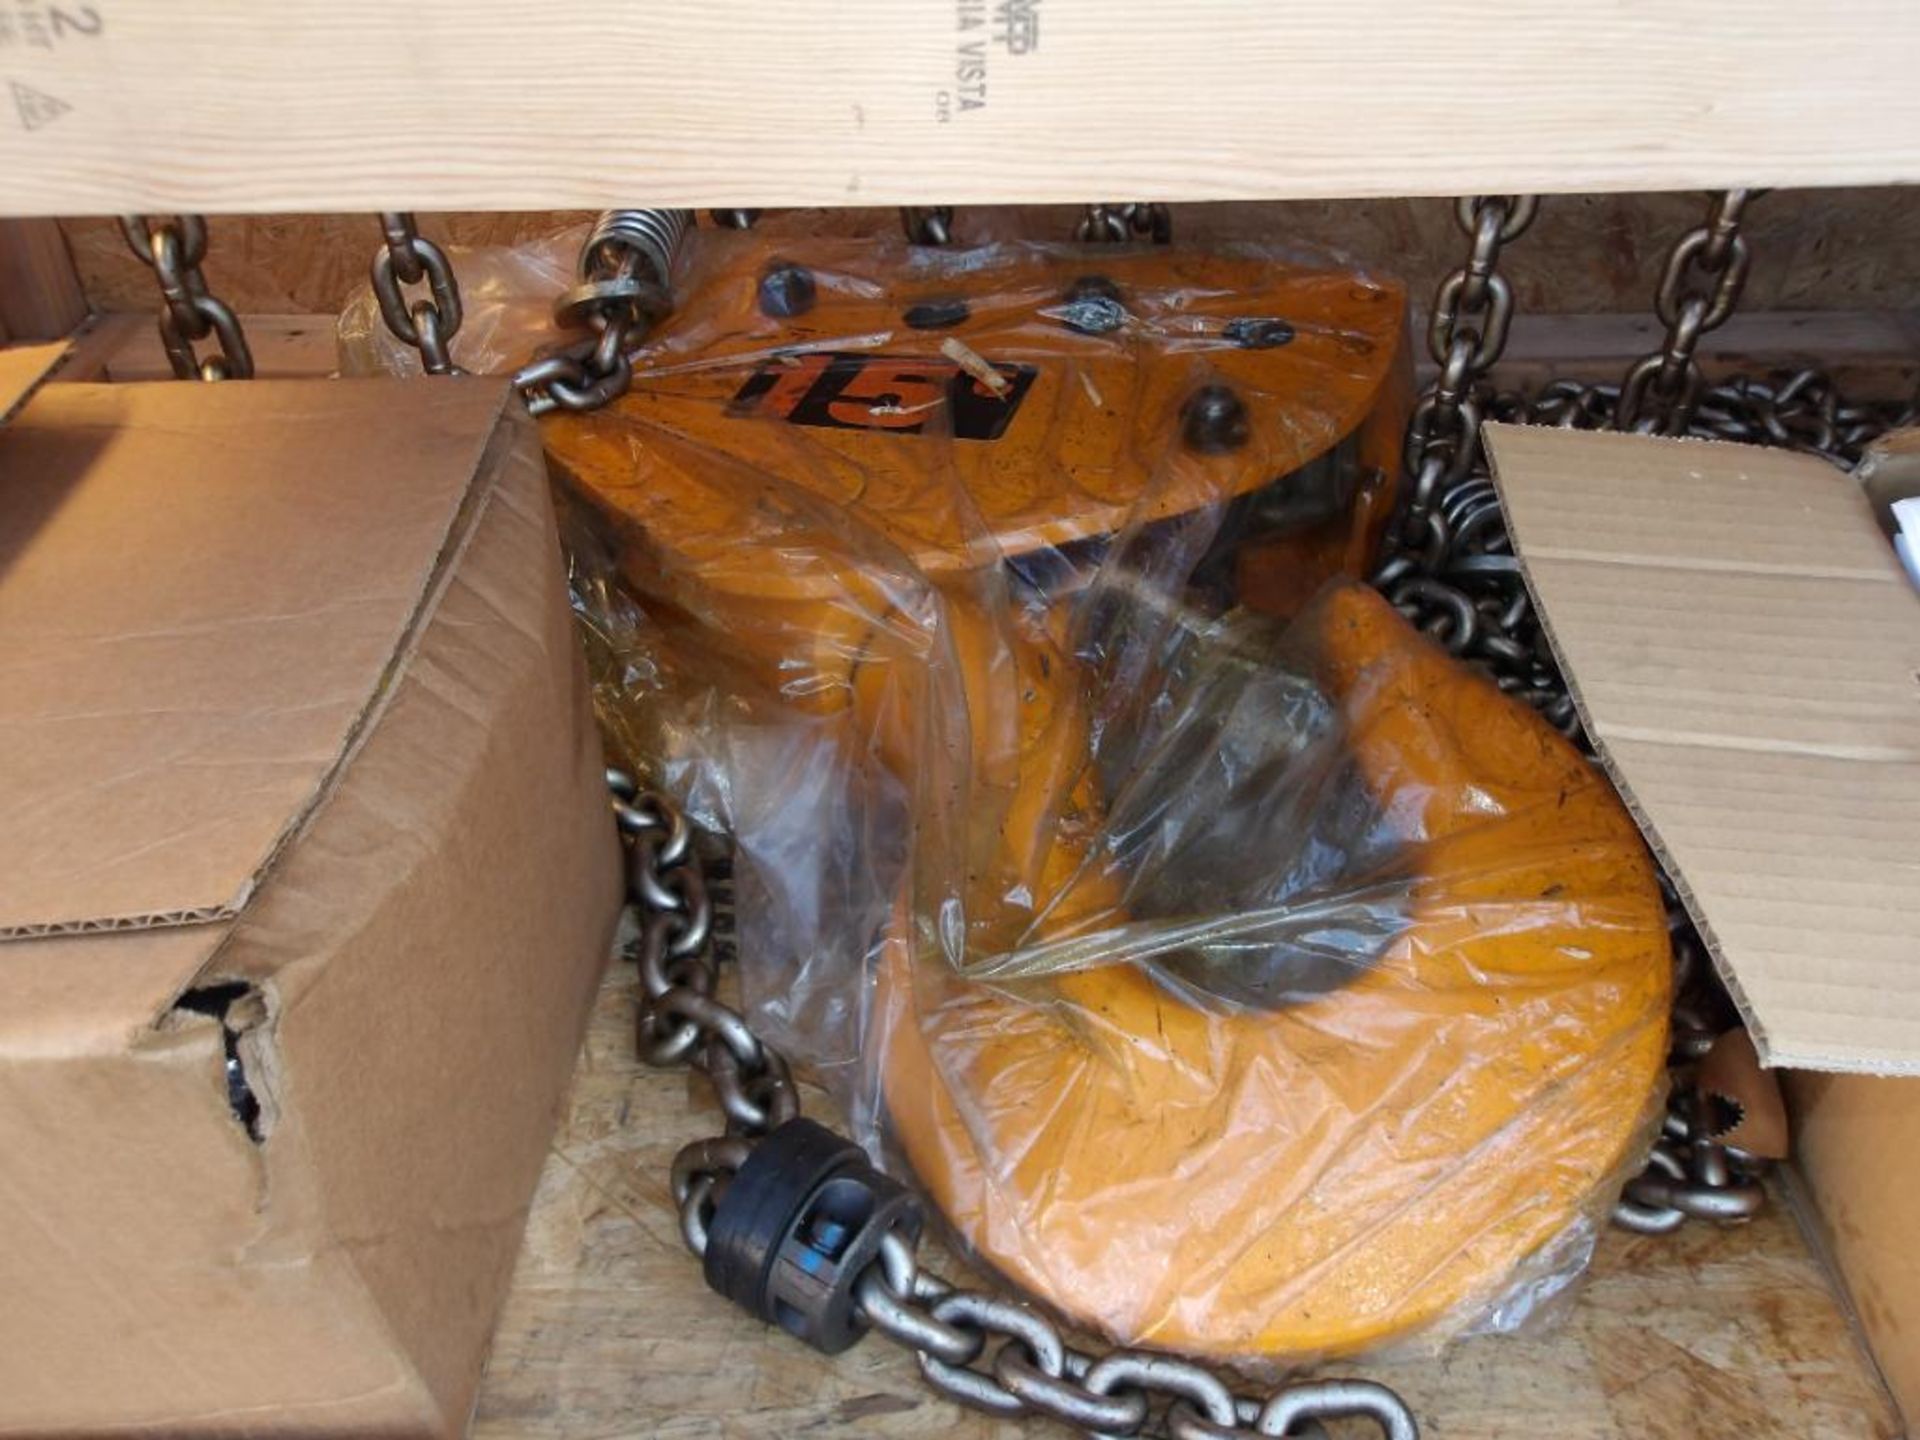 Harrington Electric 15-Ton Chain Hoist, Code: NER2020LD, S/N 330987 (New in Crate) - Image 3 of 4